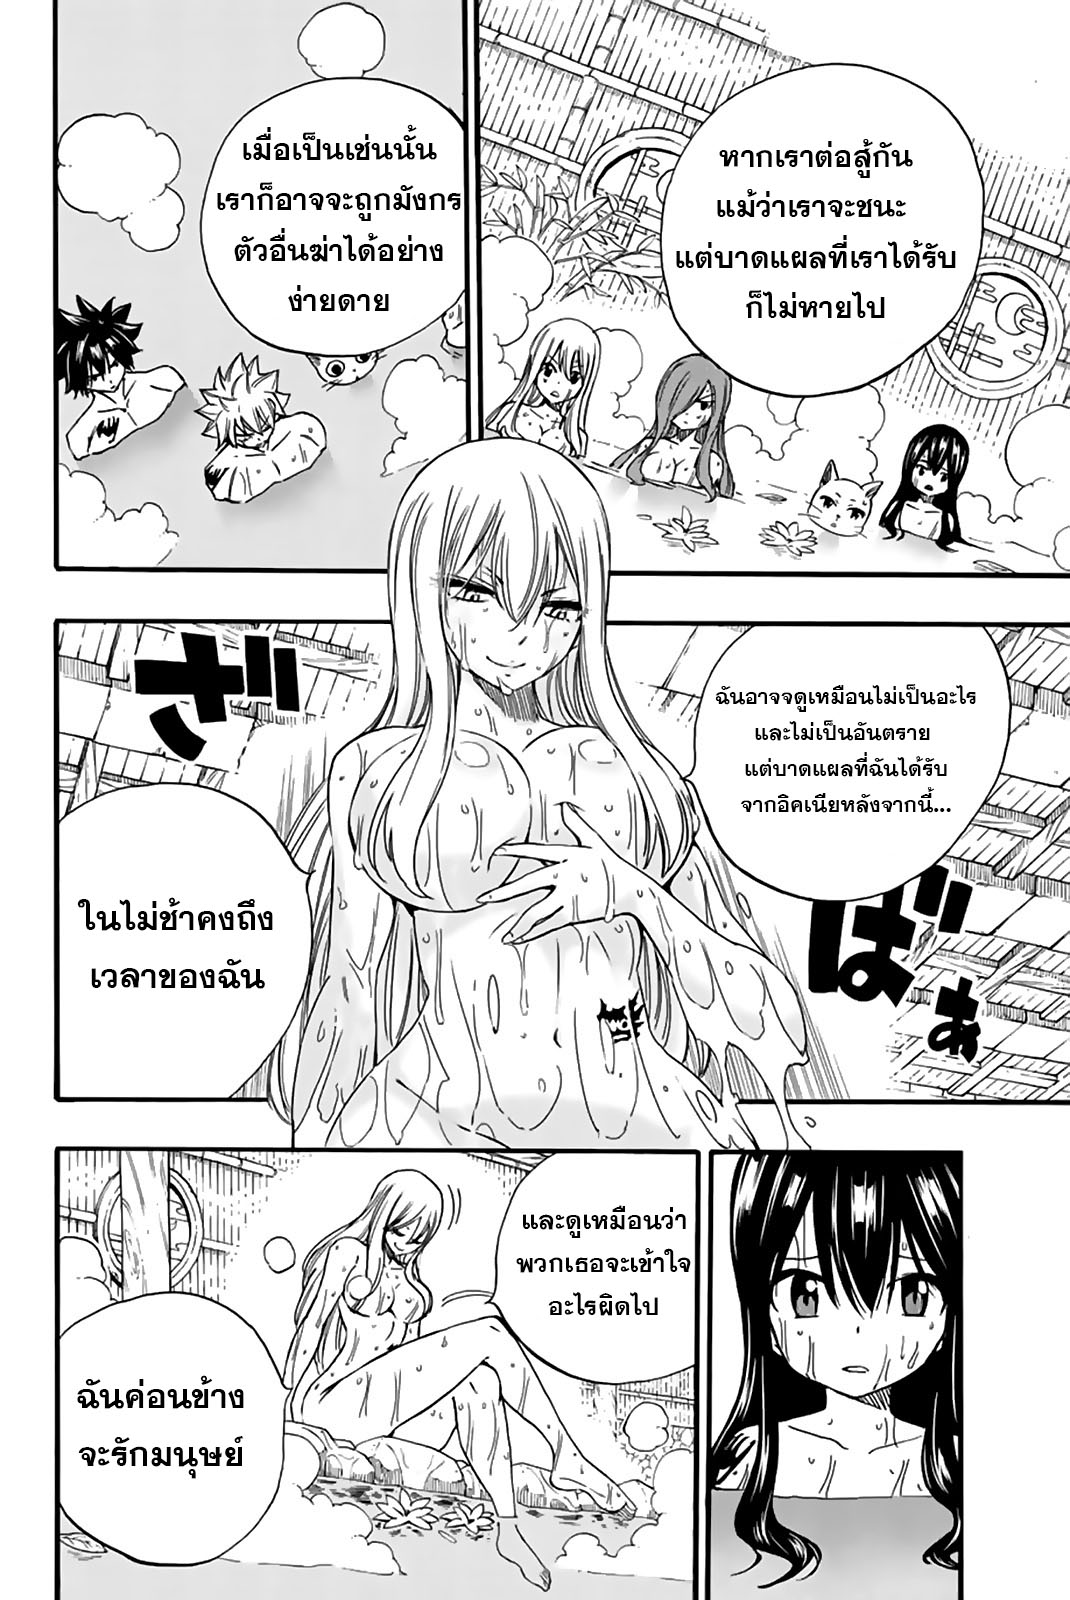 Fairy Tail 100 Years Quest 120 (14)